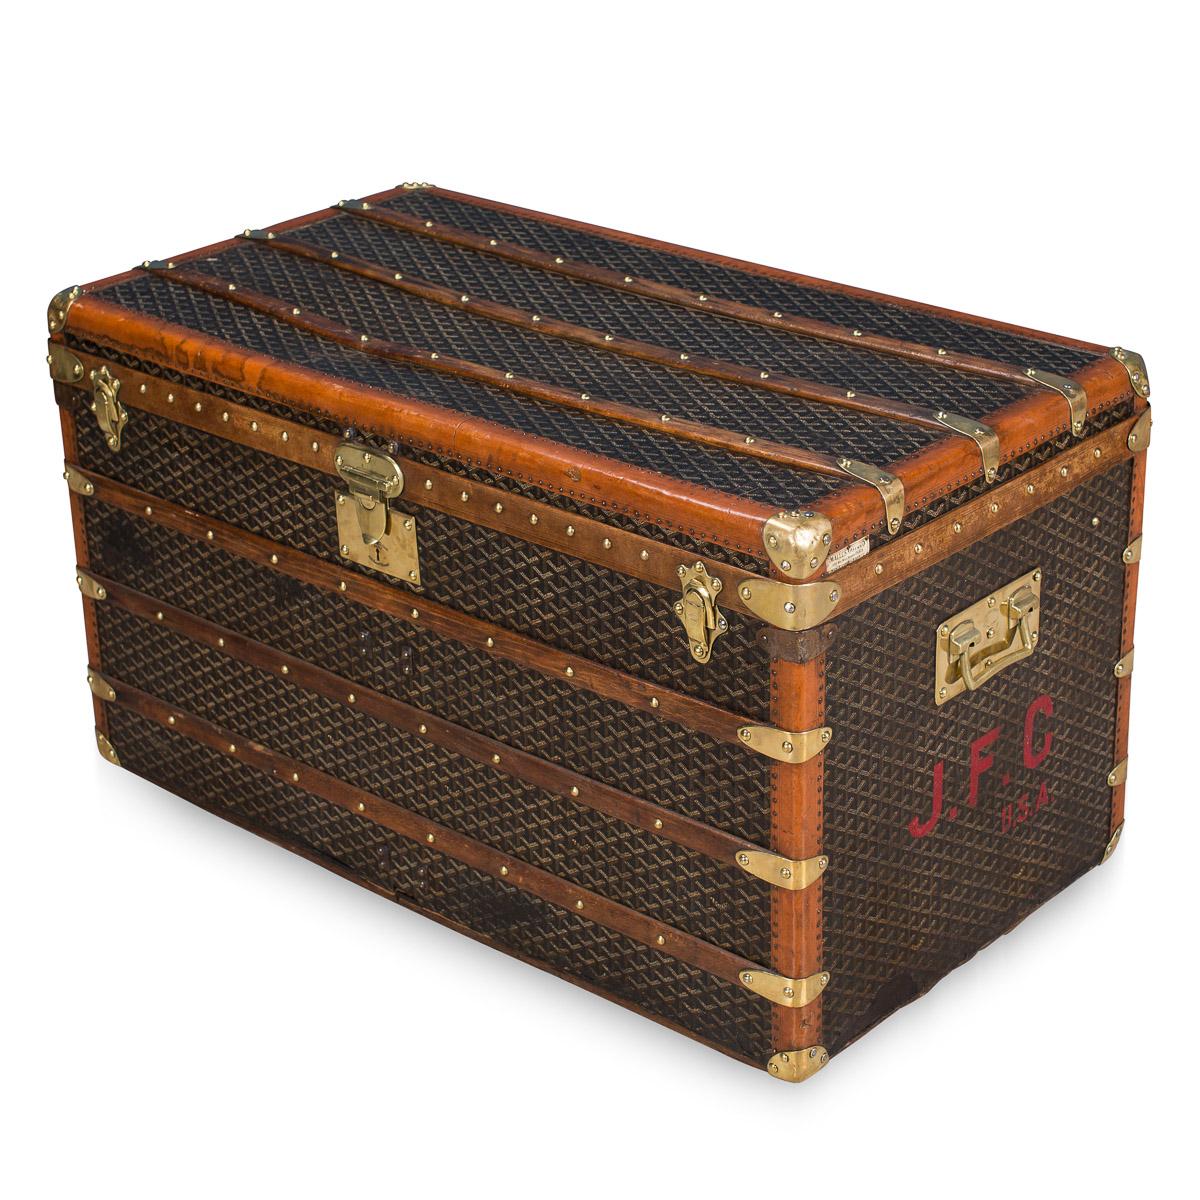 Description:

A lovely antique Goyard trunk dating to the early part of the 20th century. Over recent years the brand has been relaunched and has taken the world of fashion by storm. The original E. Goyard firm was a trunk maker which rivalled LV